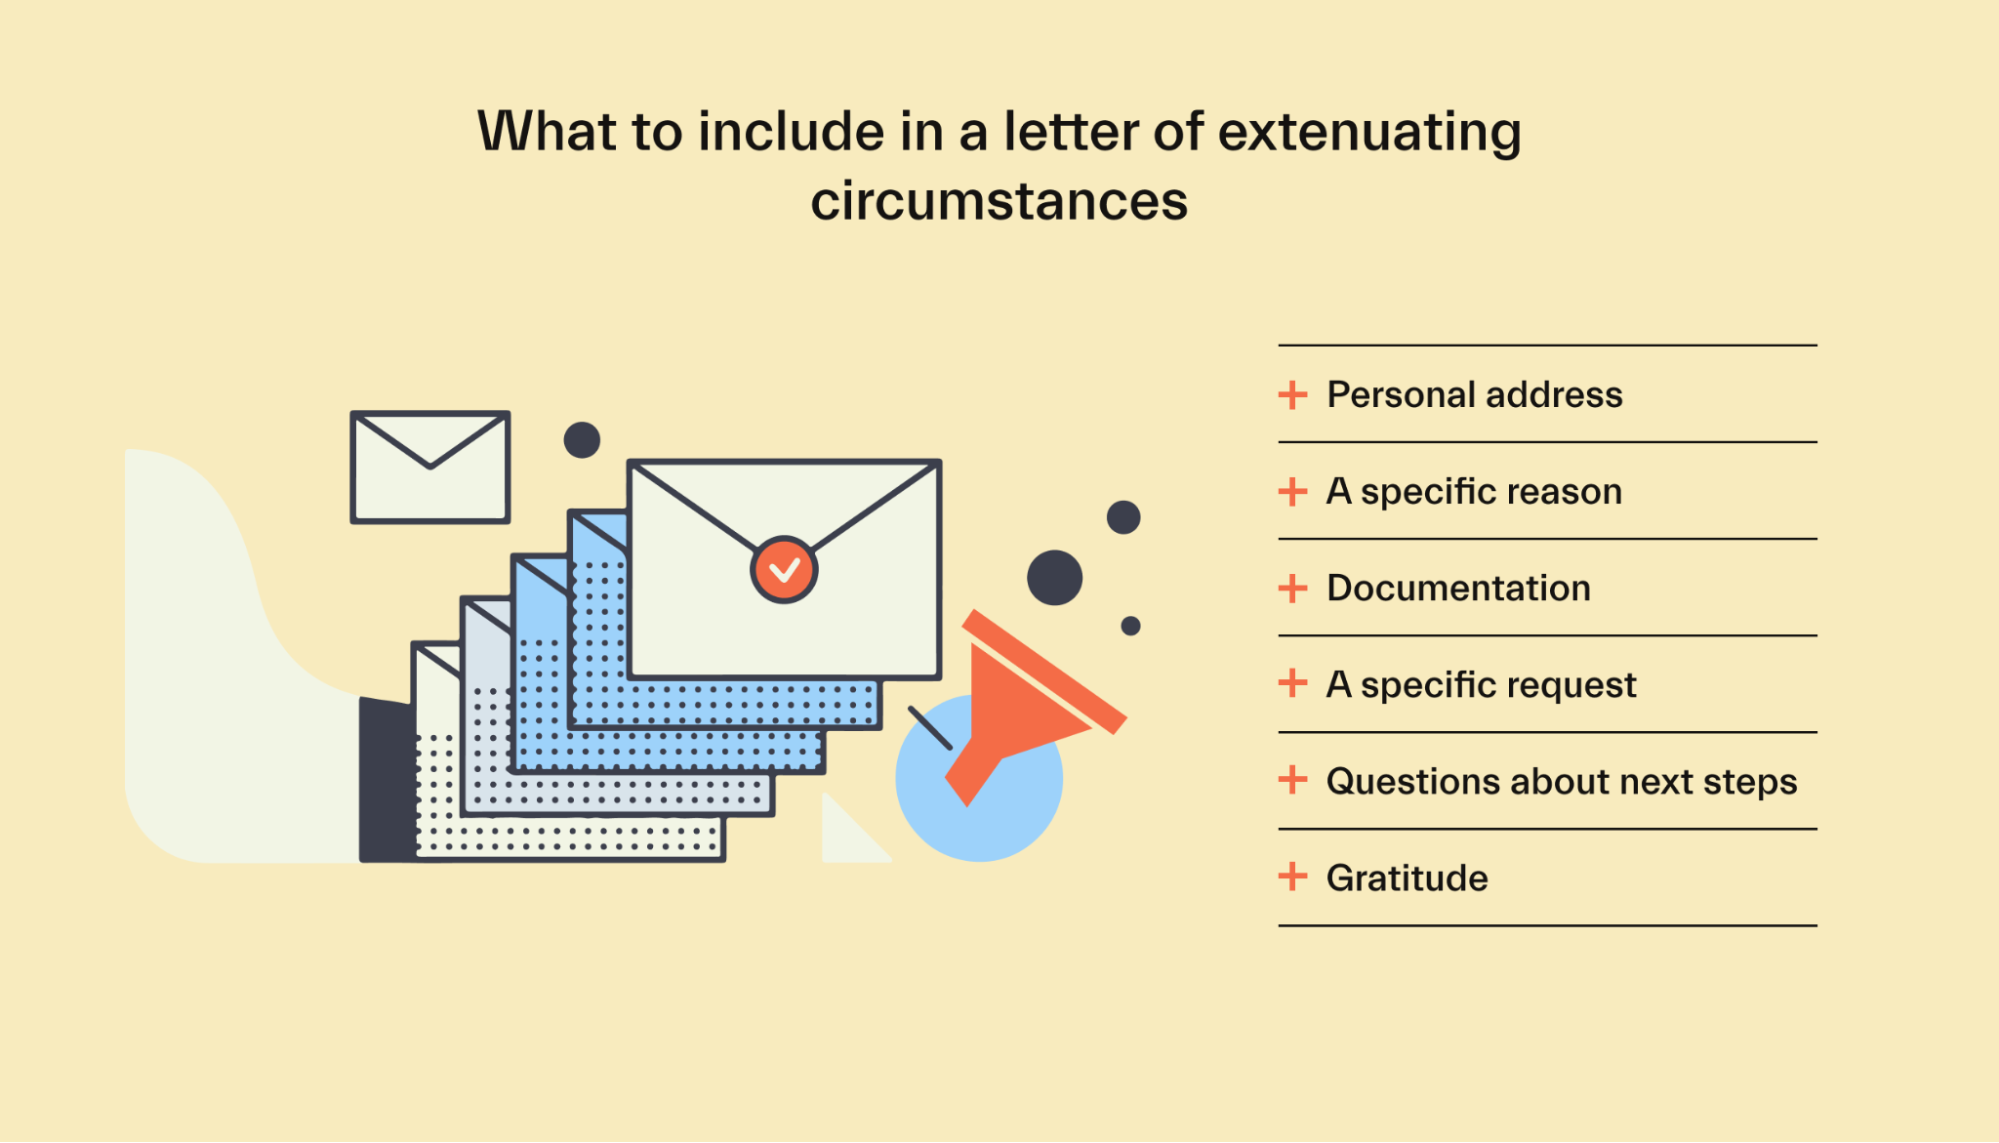 What to include in a letter of extenuating circumstances